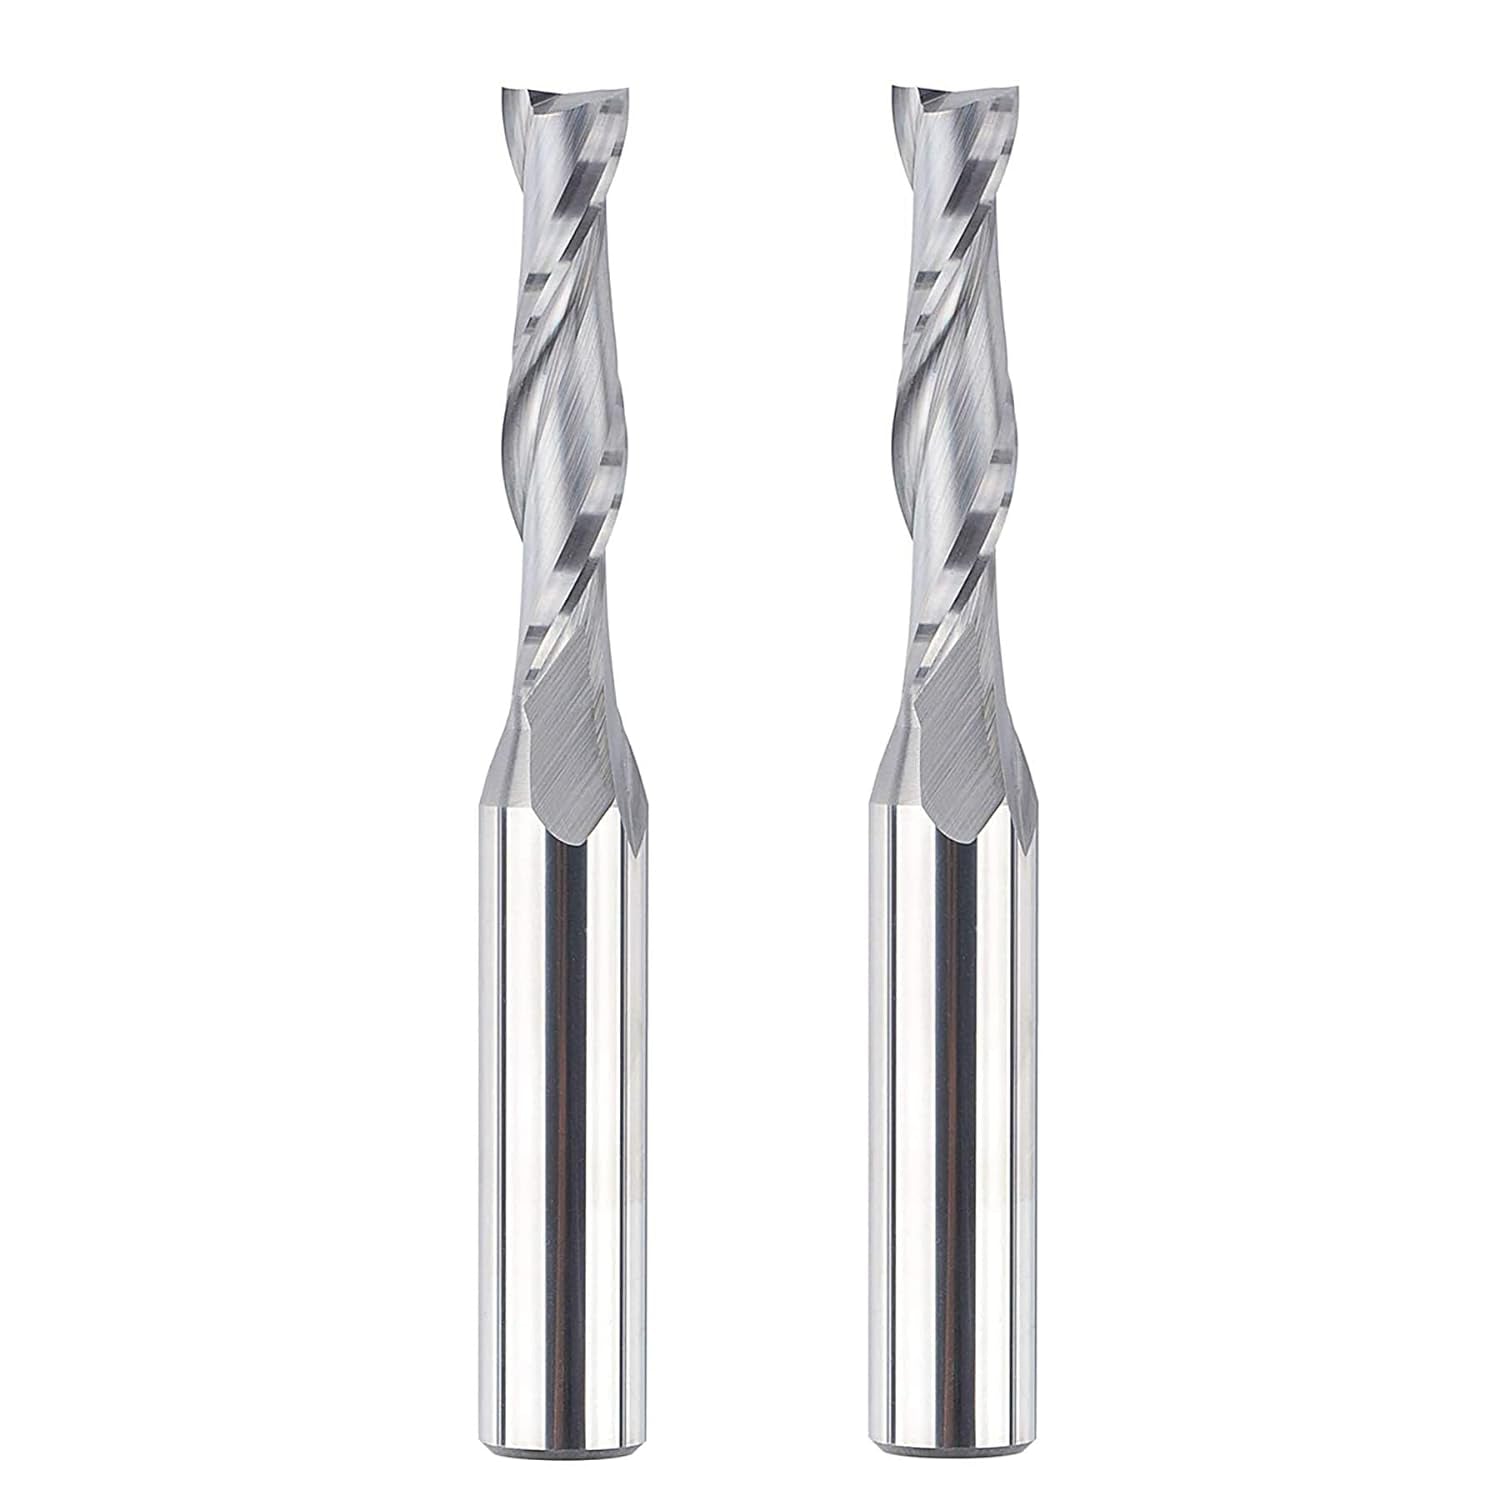 SpeTool W04010 SC Spiral Plunge 3/8" Dia x 1/2" Shank x 1-3/4" Cutting Length 4" Extra Long 2 Flute Up-Cut Router Bit